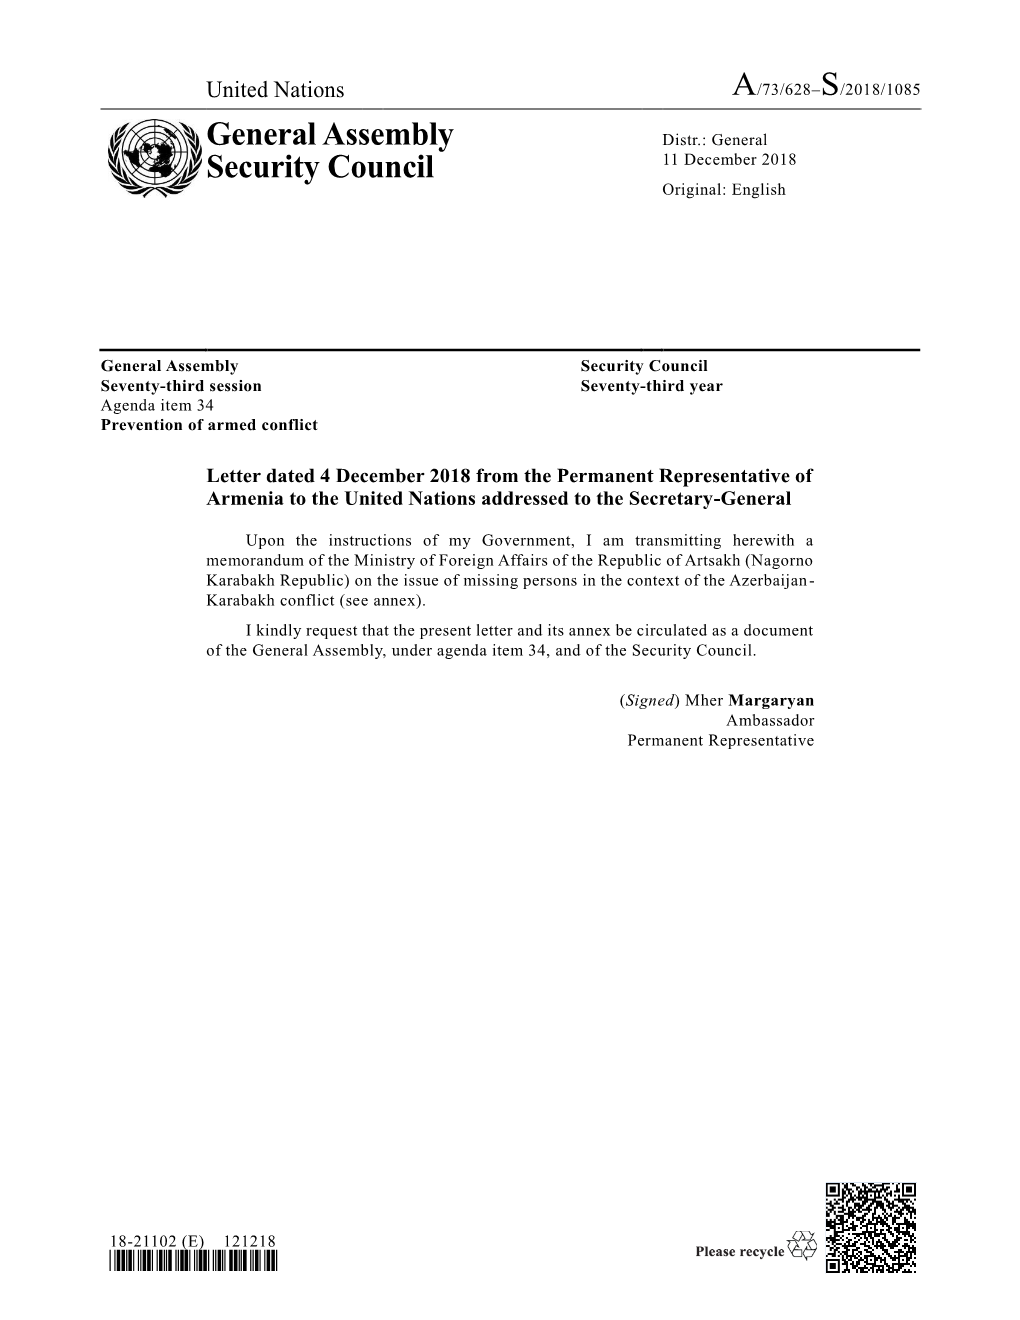 General Assembly Security Council Seventy-Third Session Seventy-Third Year Agenda Item 34 Prevention of Armed Conflict